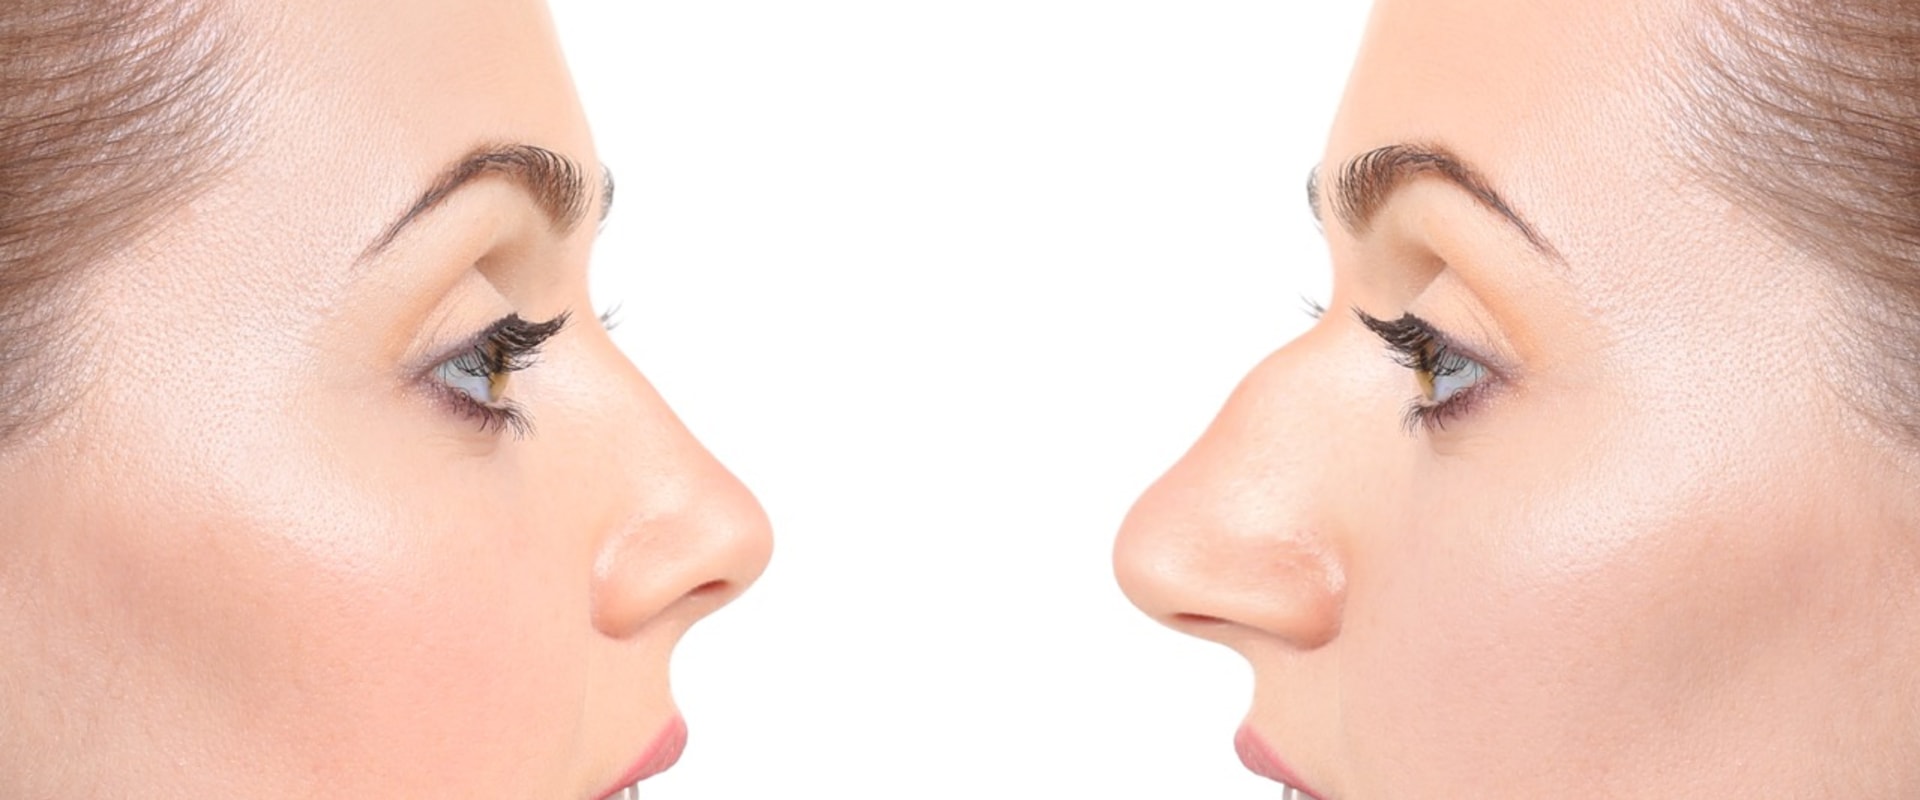 Where is the most affordable place to get a rhinoplasty?